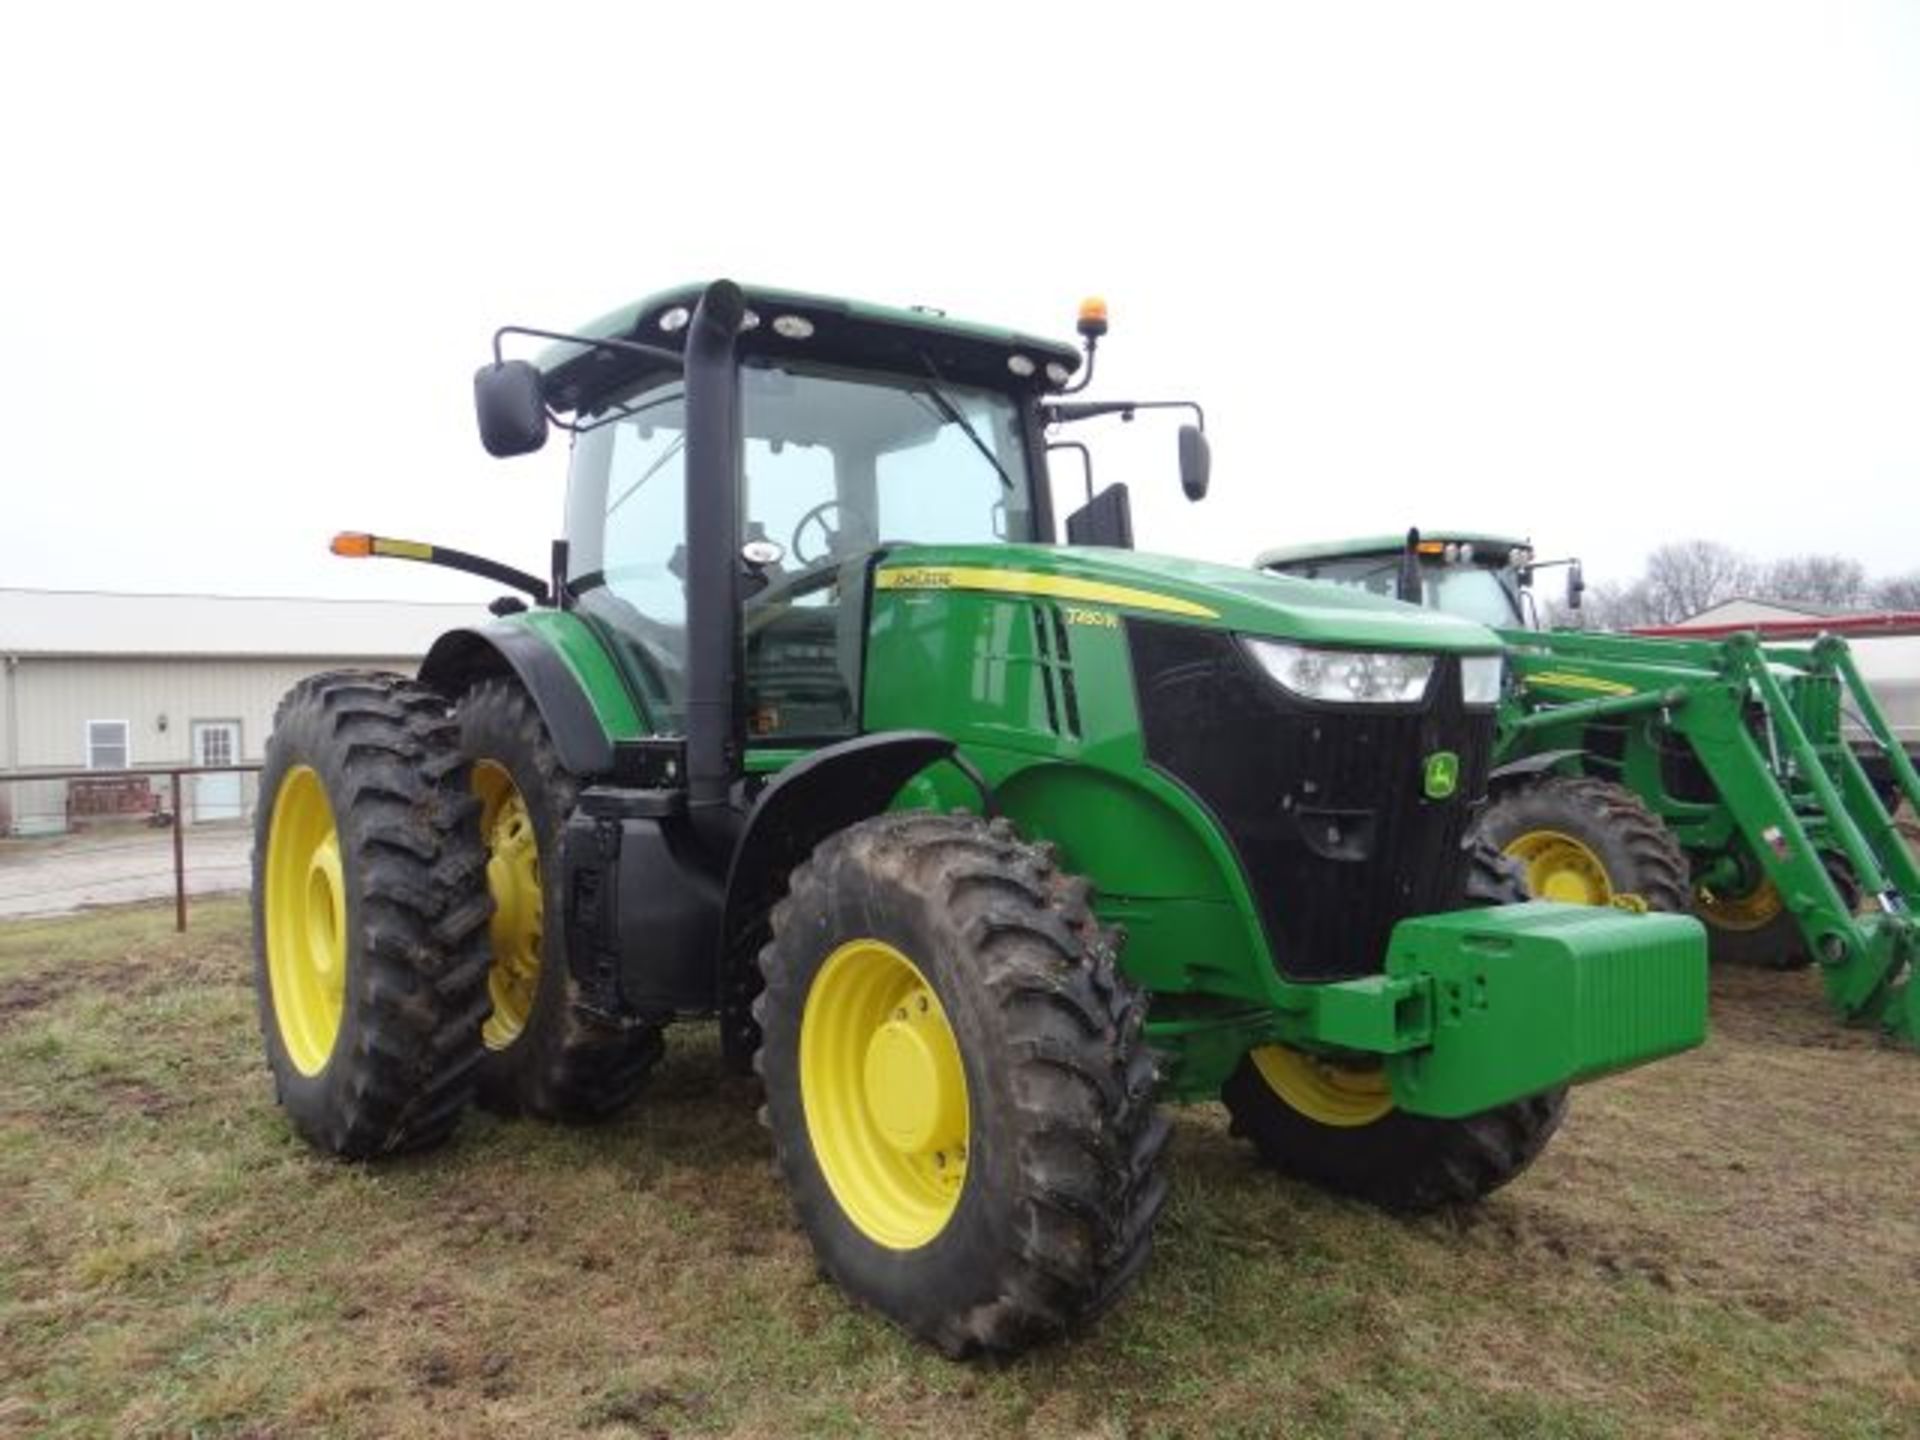 JD 7280R Tractor, 2012 - Image 2 of 6